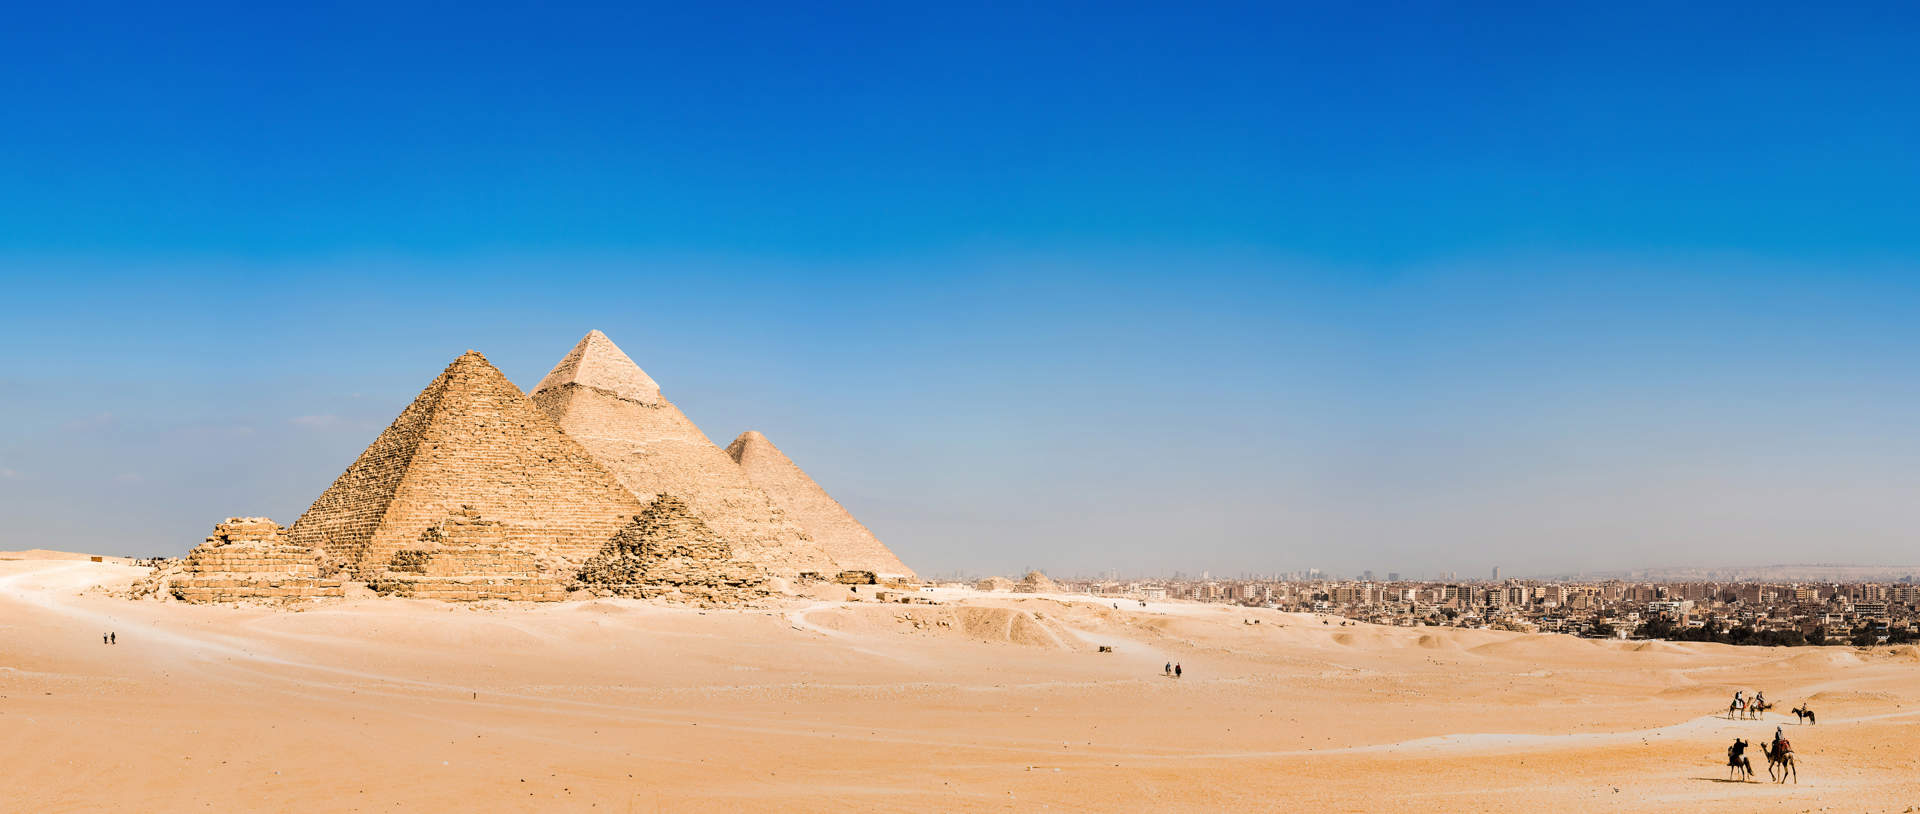 Panorama Of The Area With The Great Pyramids Of Giza, Egypt